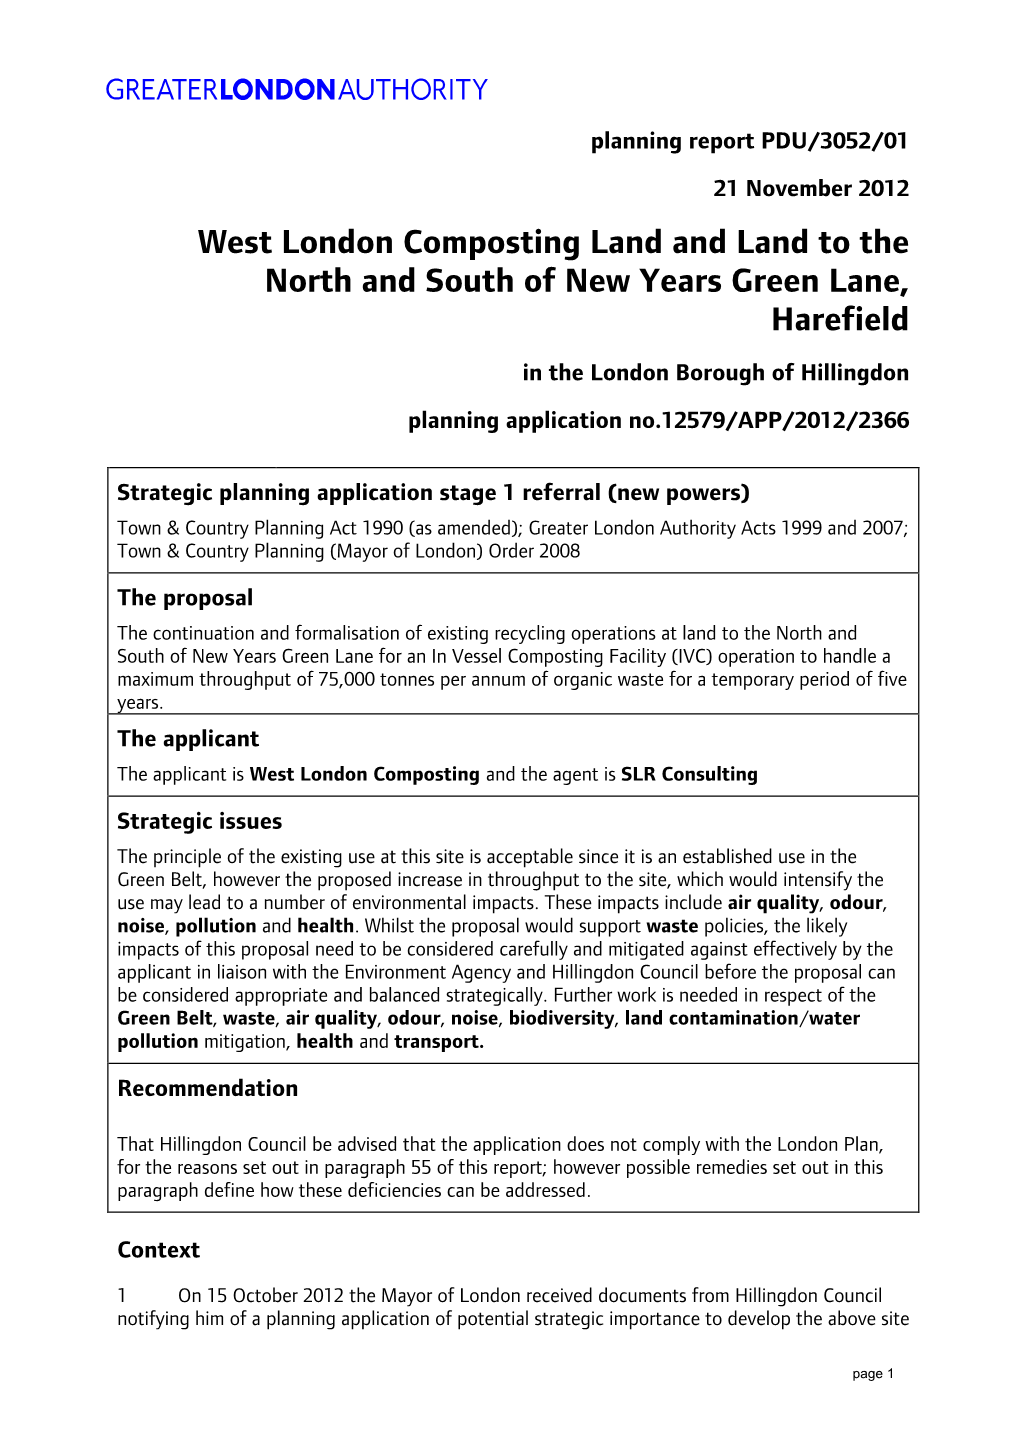 West London Composting Land and Land to the North and South of New